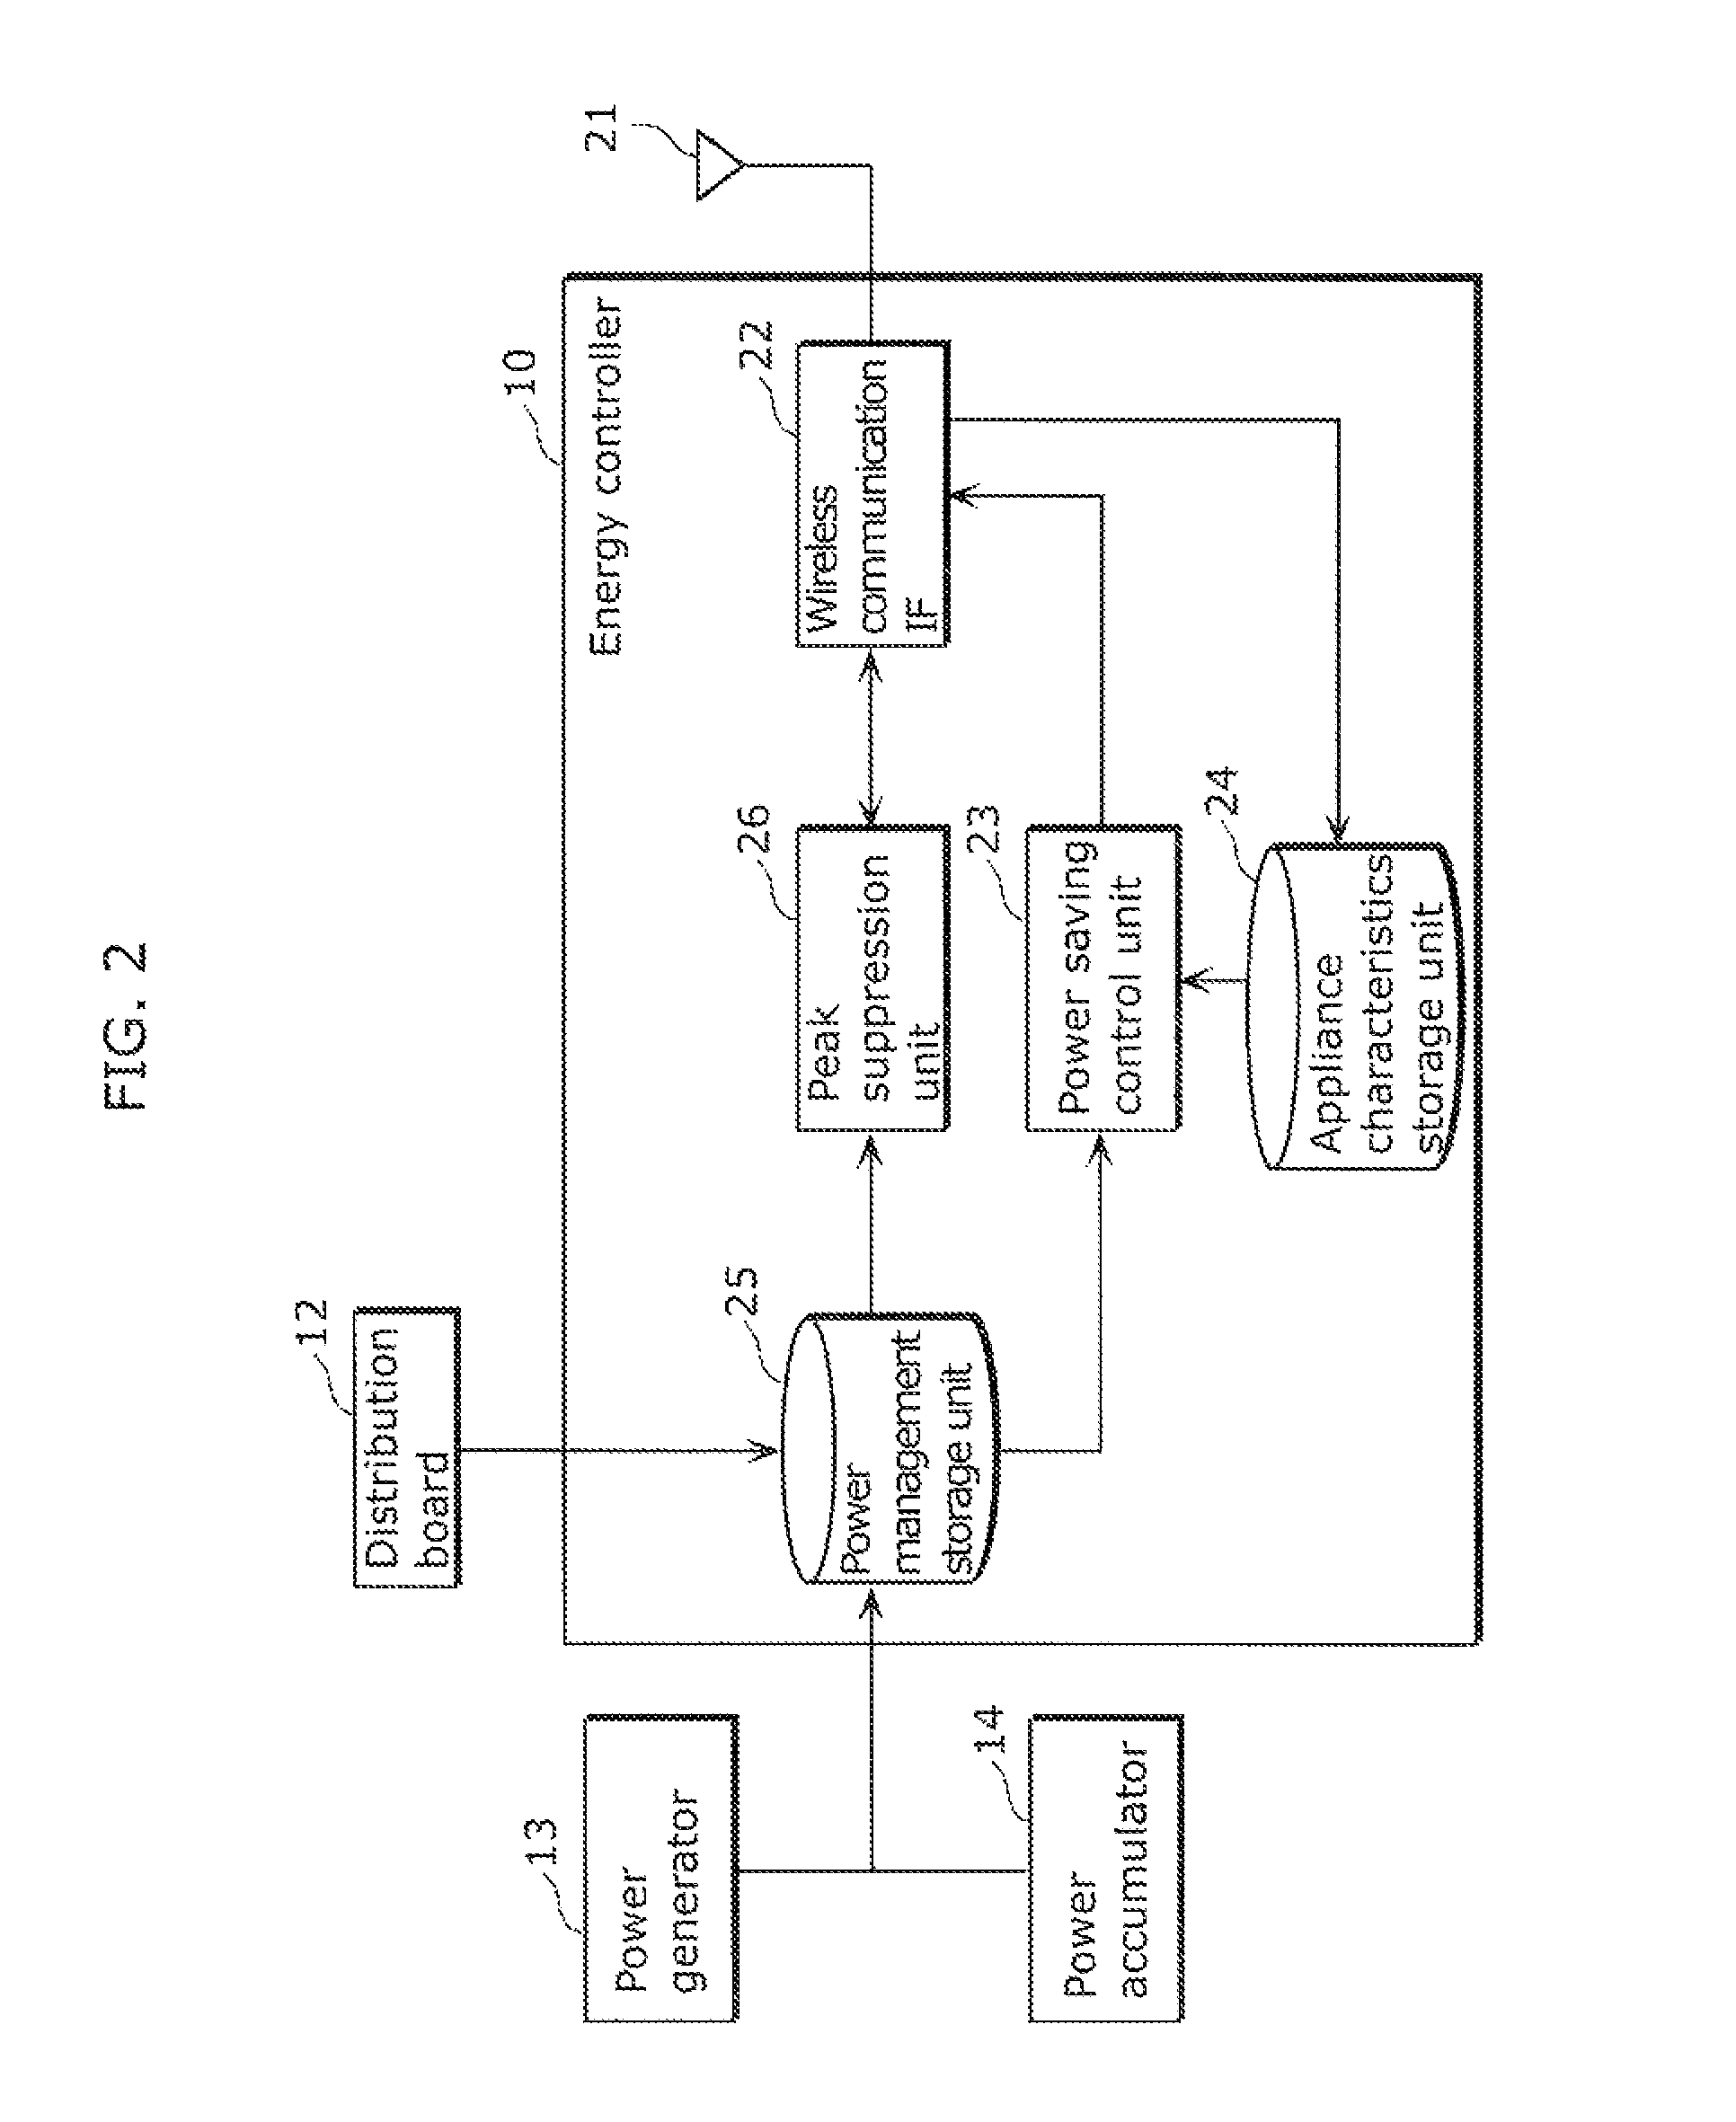 Power control device for home appliances